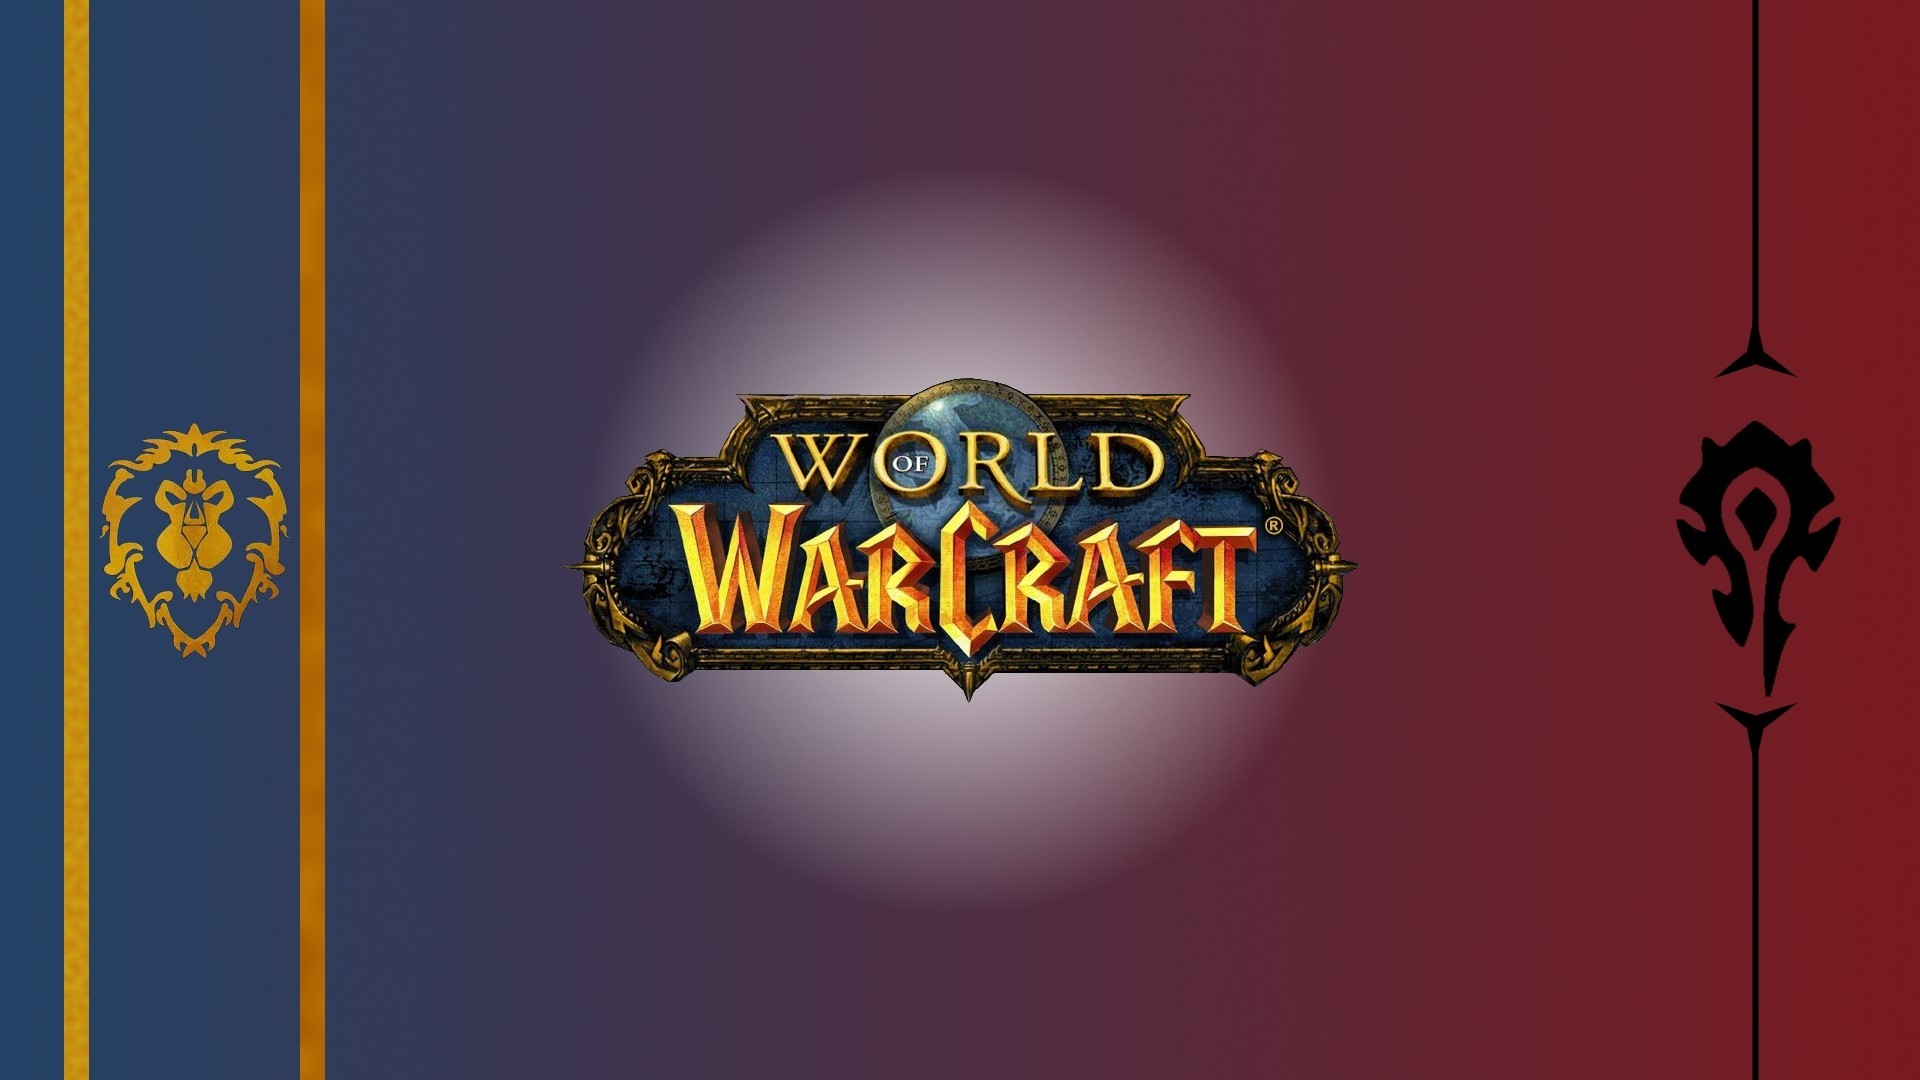 1920x1080 World of Warcraft, Alliance, Horde, Blue, Red, Black, Lion, PC gaming  Wallpapers HD / Desktop and Mobile Backgrounds